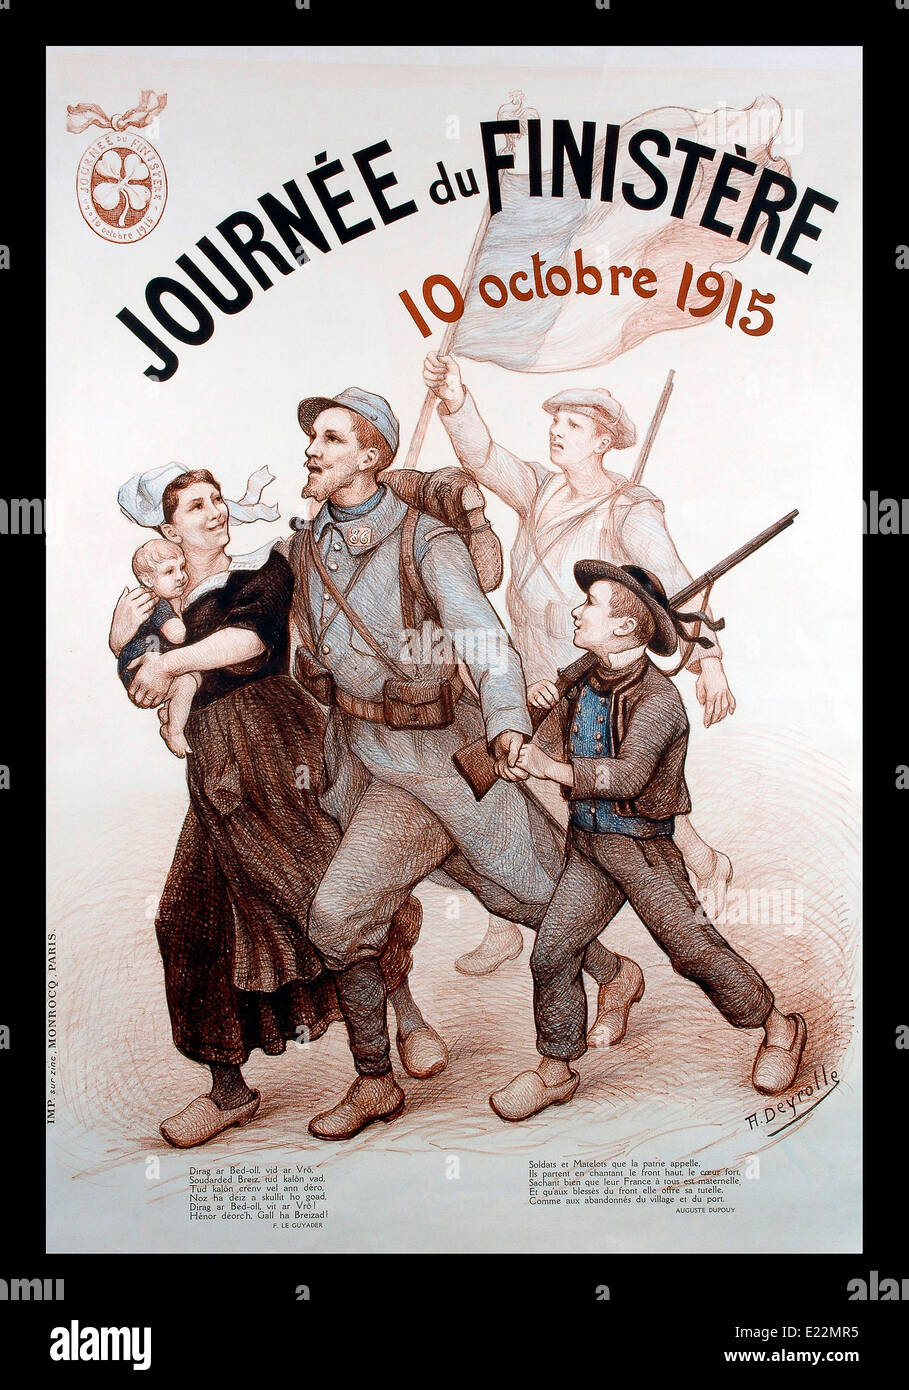 Vintage WW1 French poster showing returning soldier from combat 1915 Journee du Finistere 'The Day of Finistere' Stock Photo